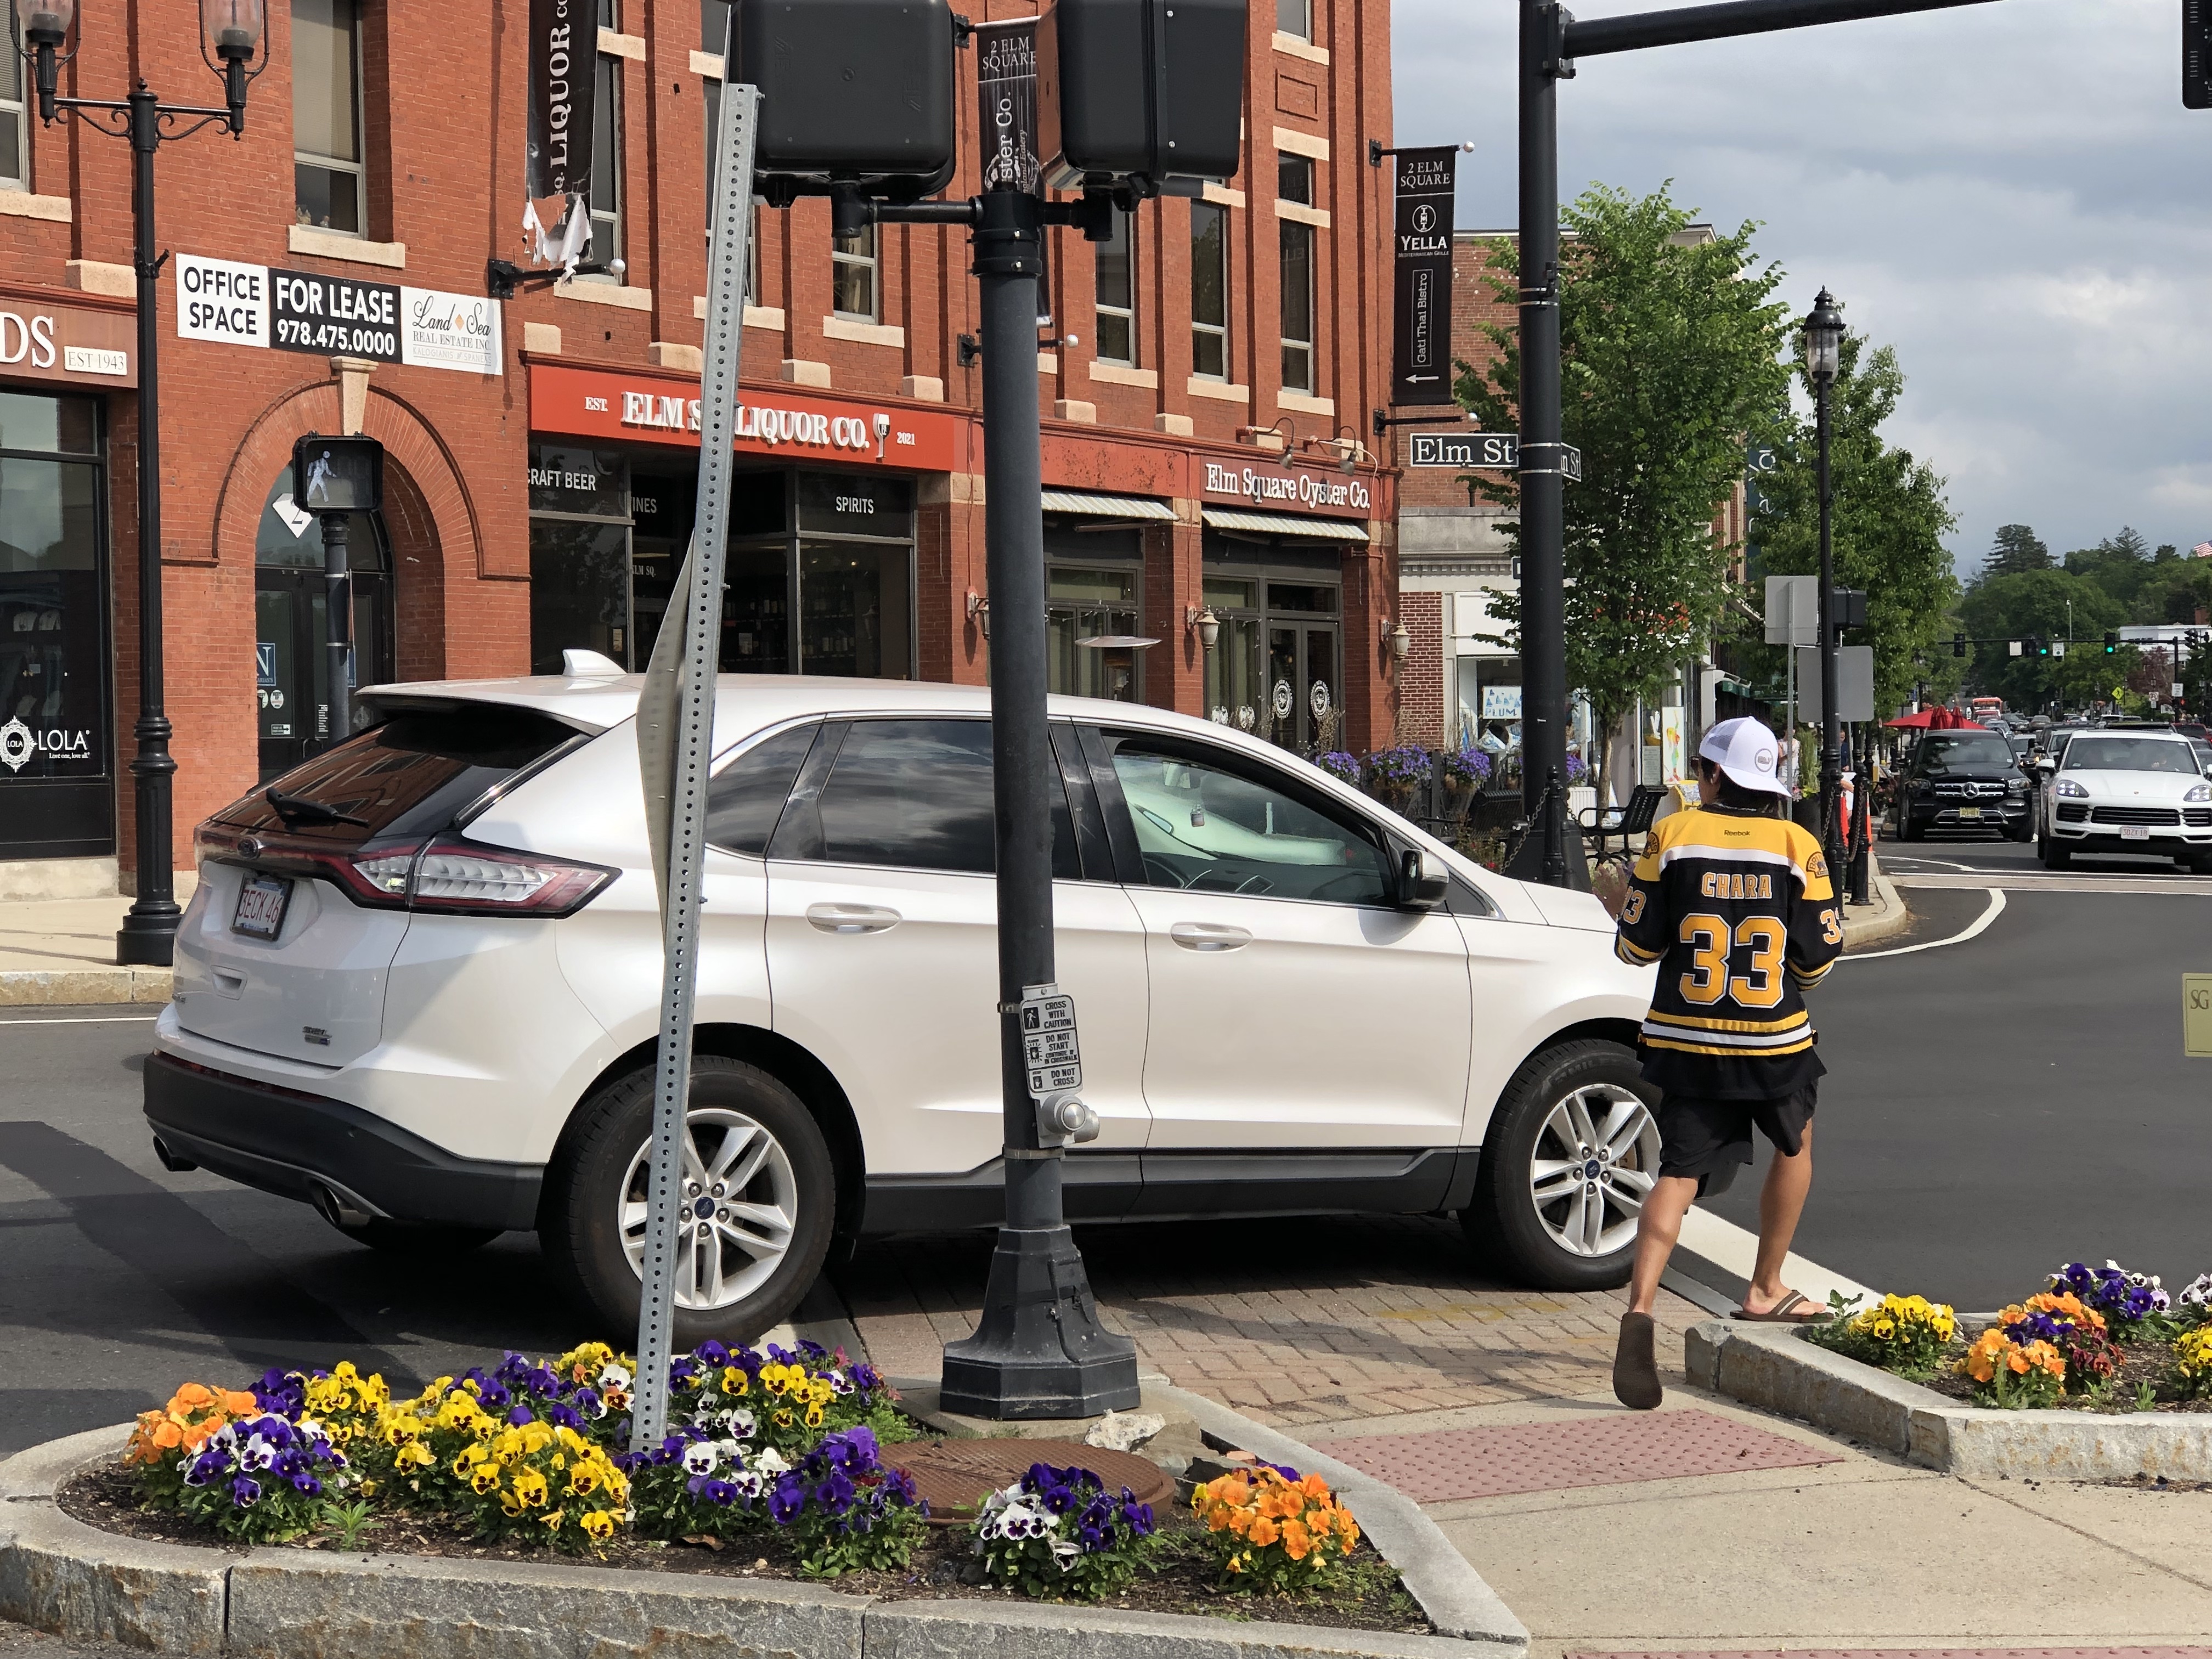 A white SUV blocks a crosswalk while a pedestrian steps up onto the adjacent curb to try and get by. On the other side of the crosswalk a "walk" symbol is visible on the pedestrian signal. Beyond are several small businesses in a brick multi-story building.